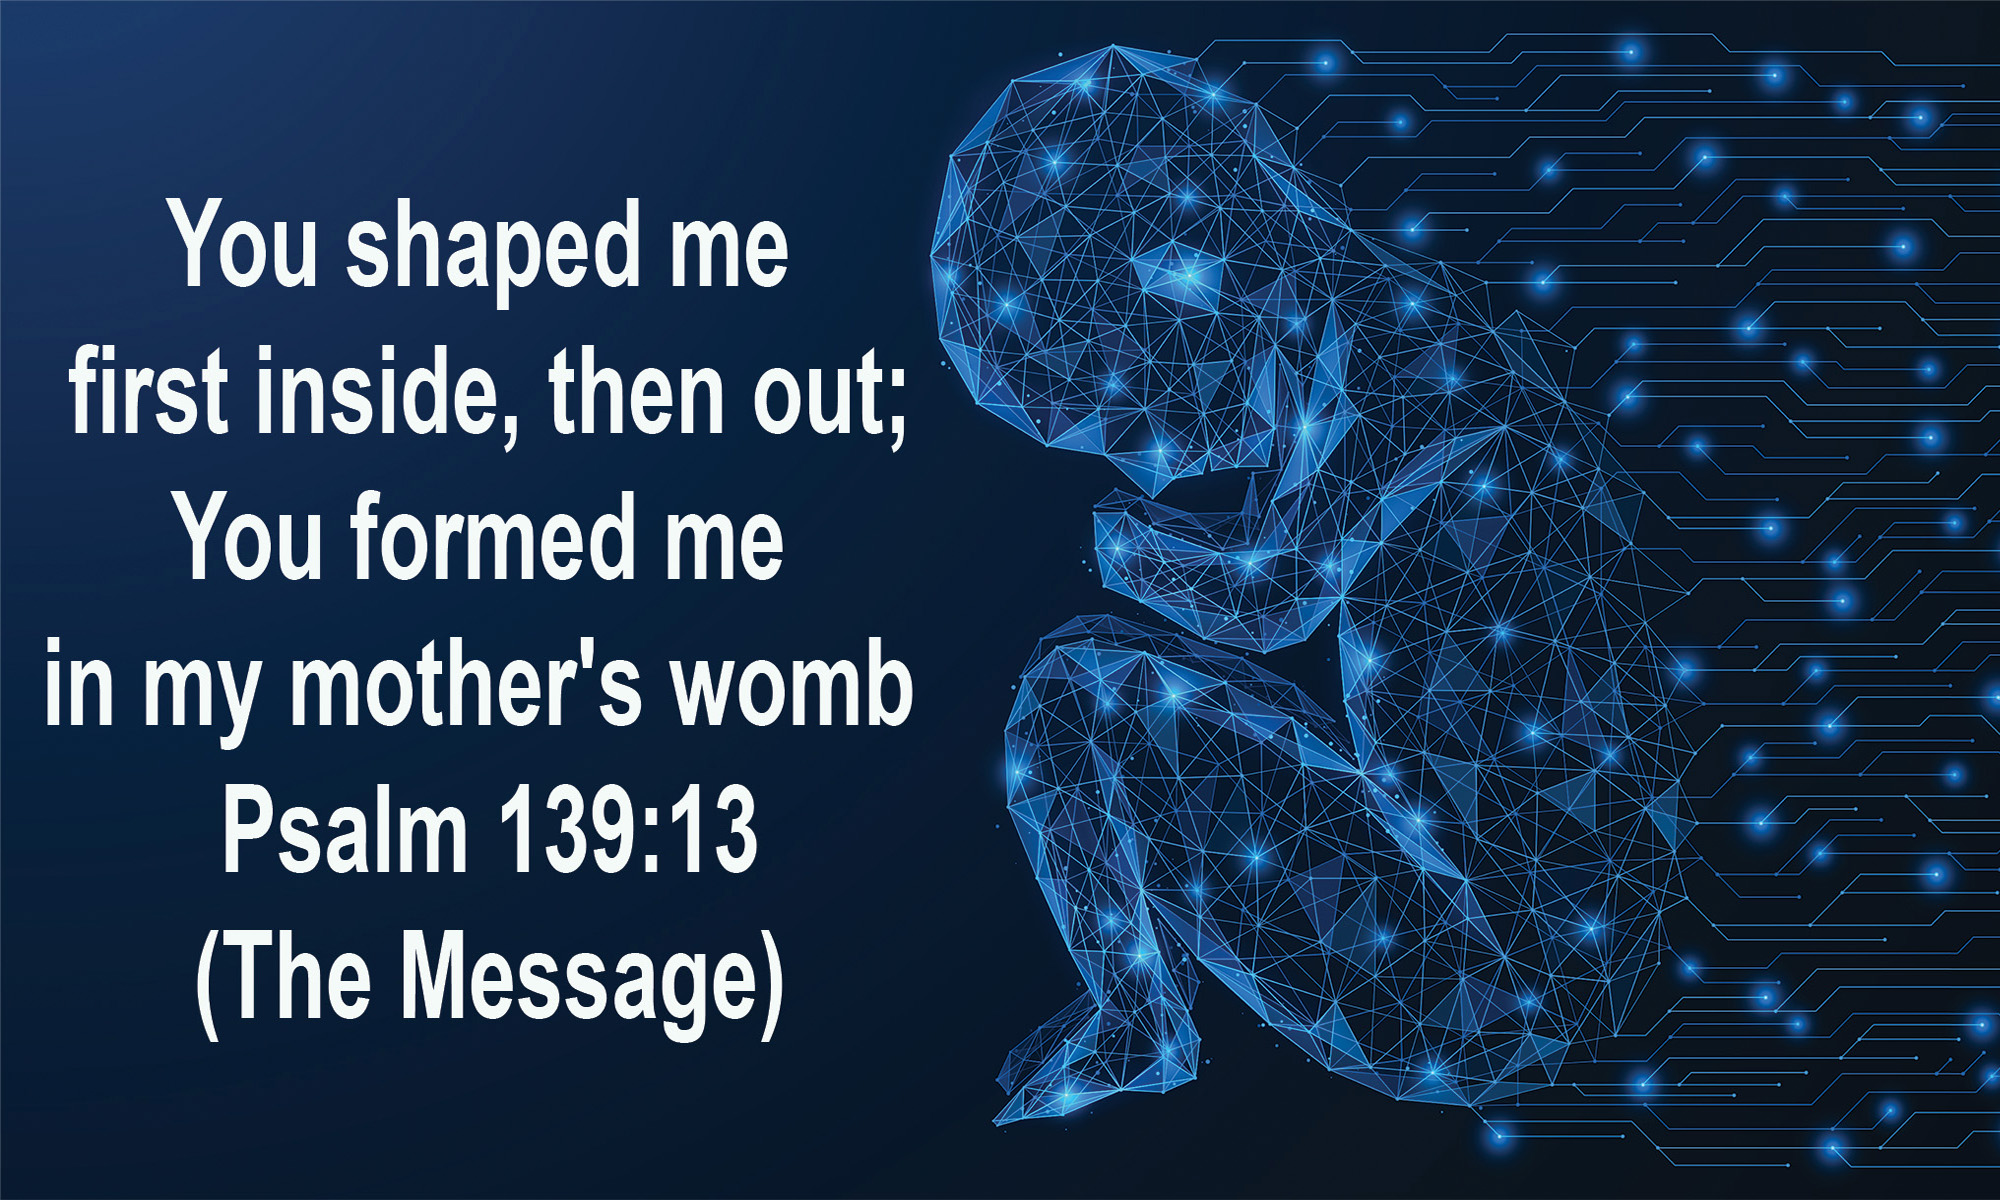 You formed me first inside, then out. You formed me in my mother's womb. Psalm 139:13 (The Message)